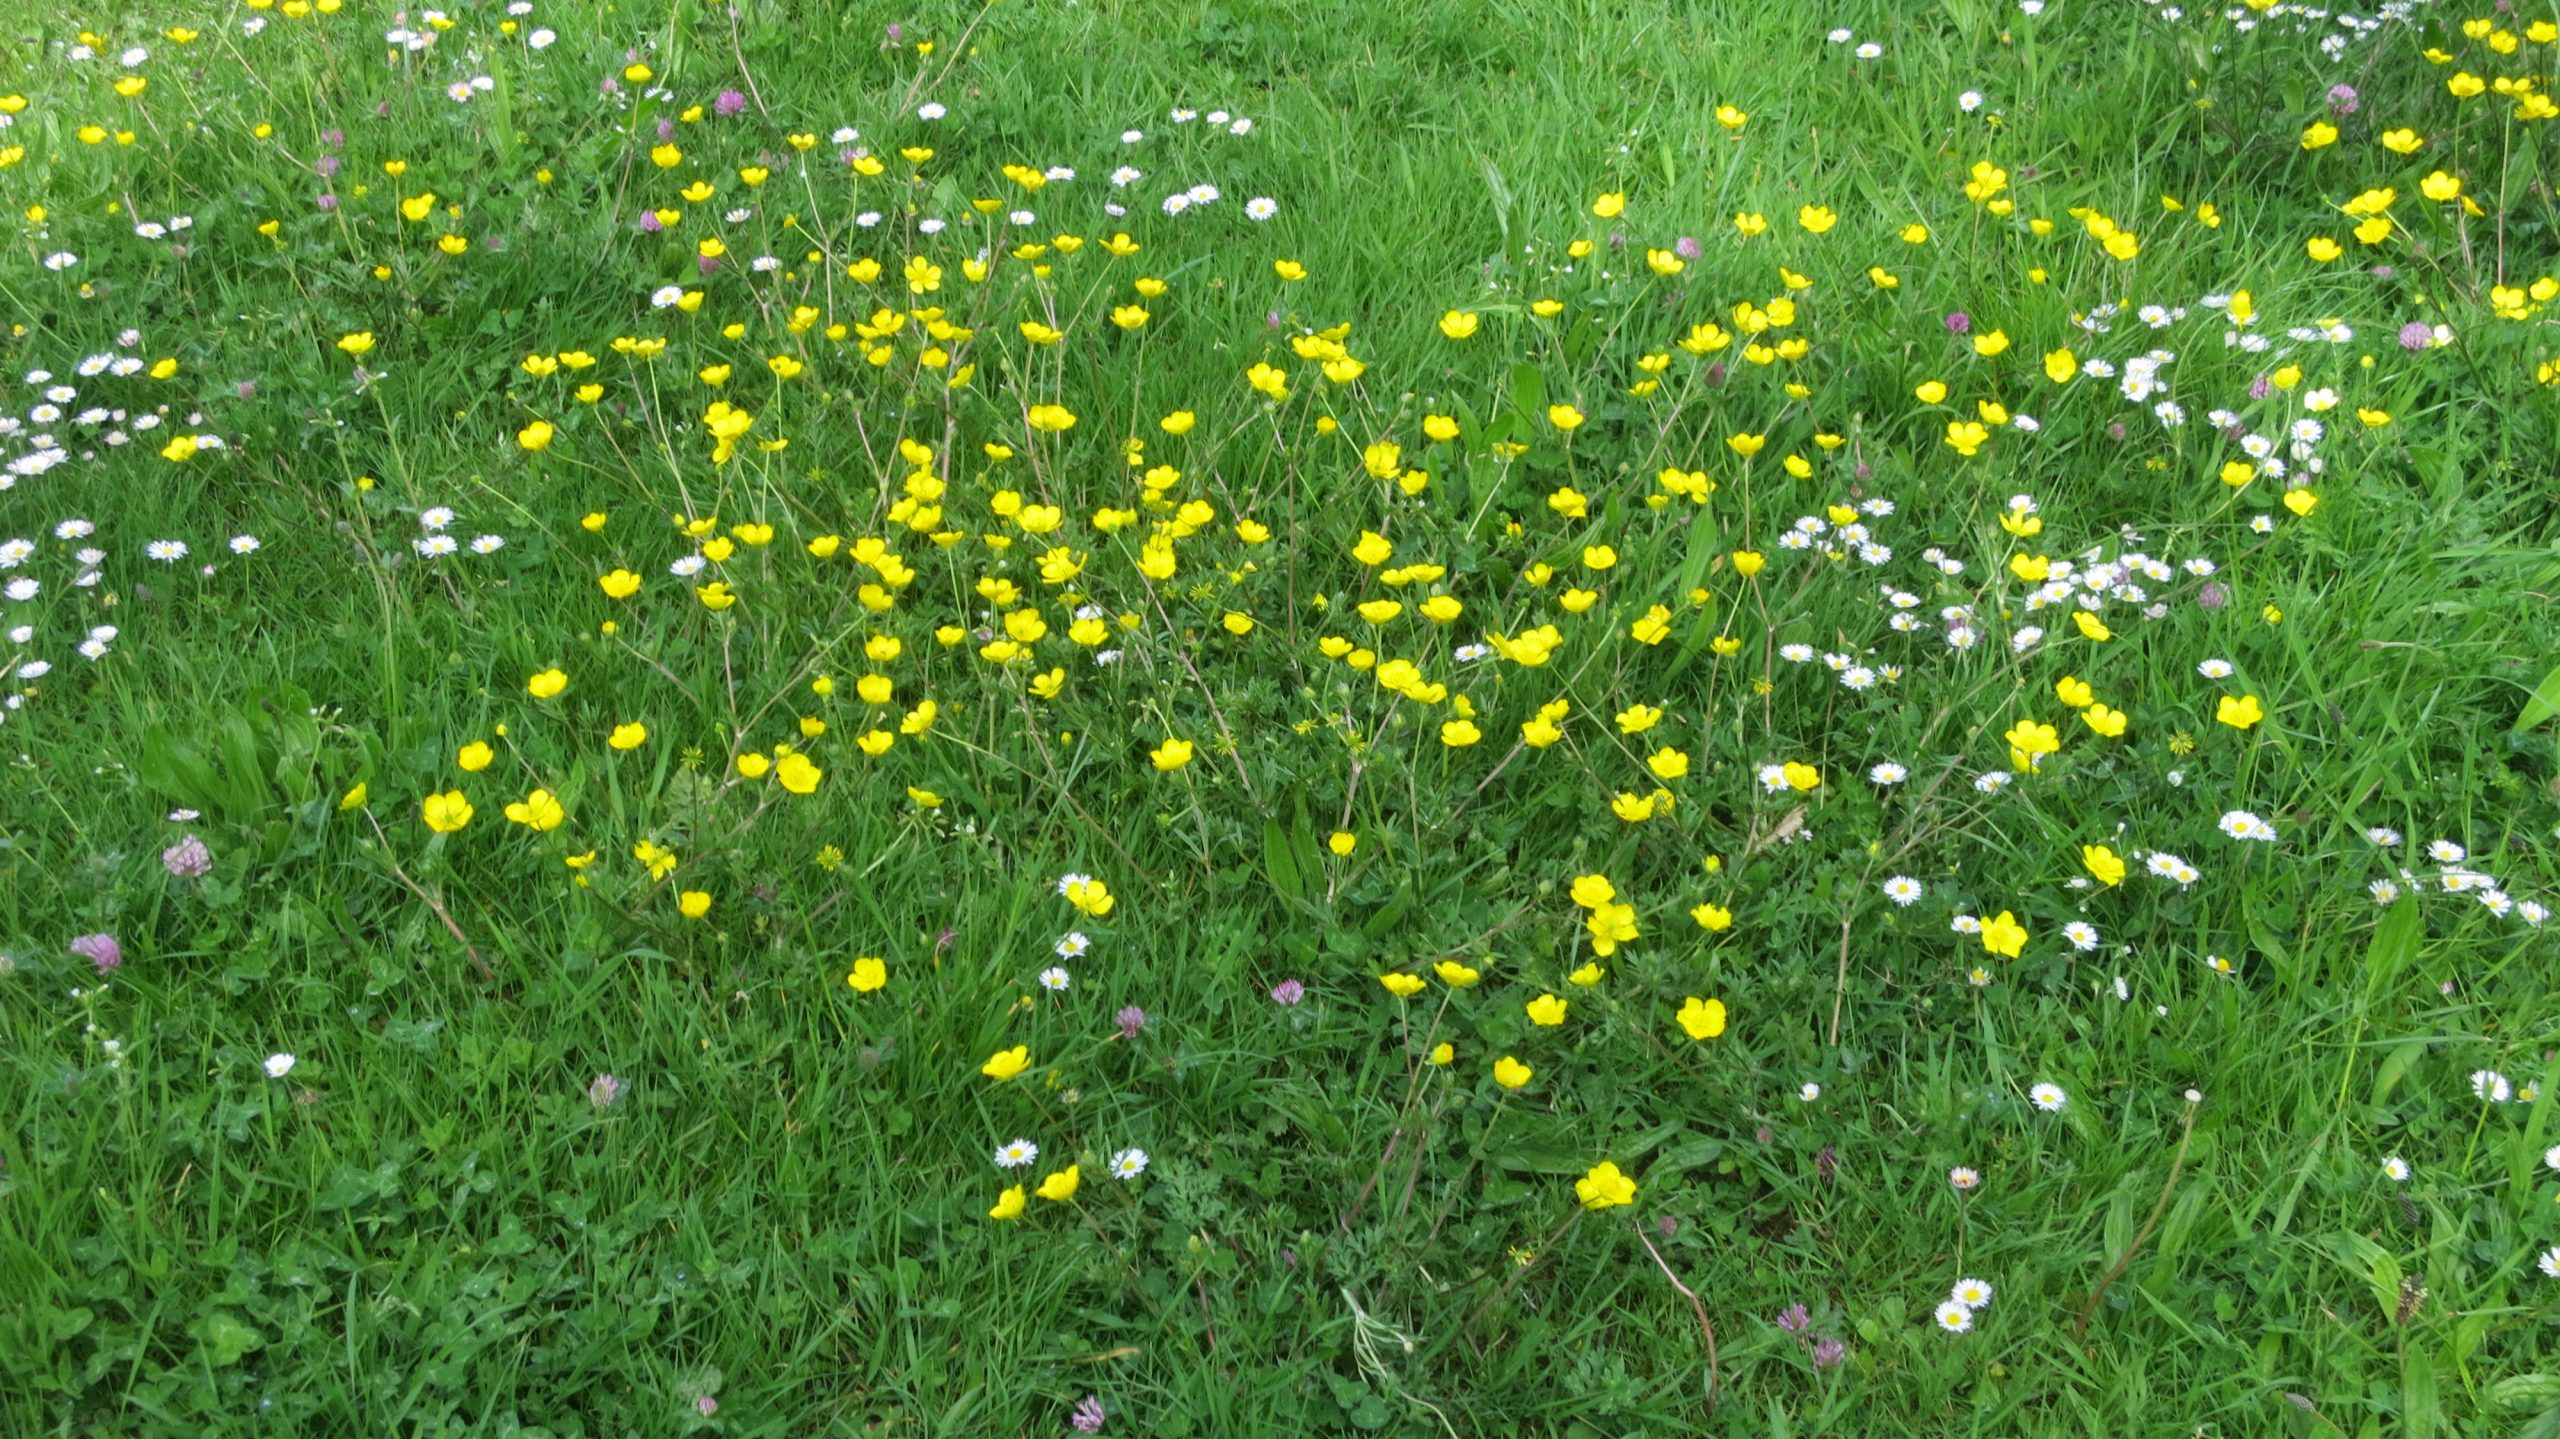 Buttercups, daisies and clover